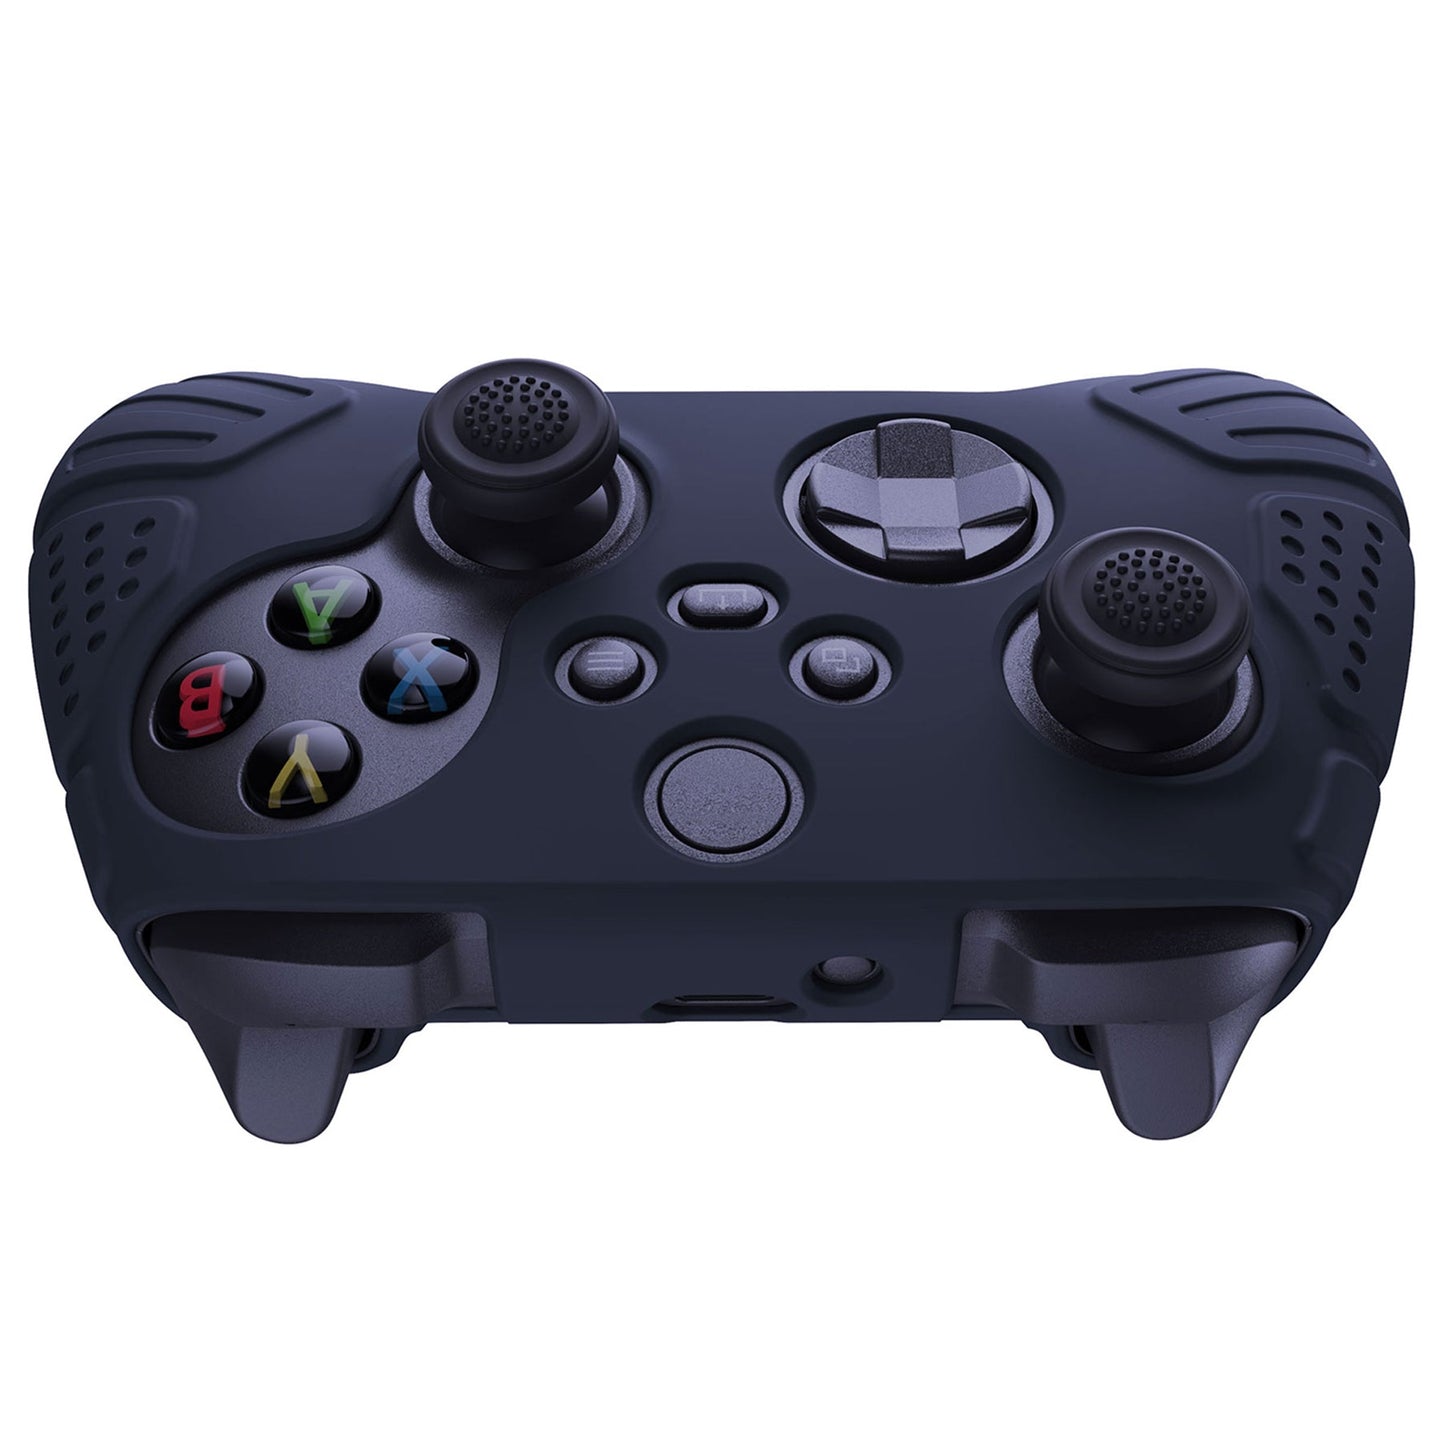 PlayVital Guardian Edition Midnight Blue Ergonomic Soft Anti-slip Controller Silicone Case Cover, Rubber Protector Skins with Black Joystick Caps for Xbox Series S and Xbox Series X Controller - HCX3003 PlayVital